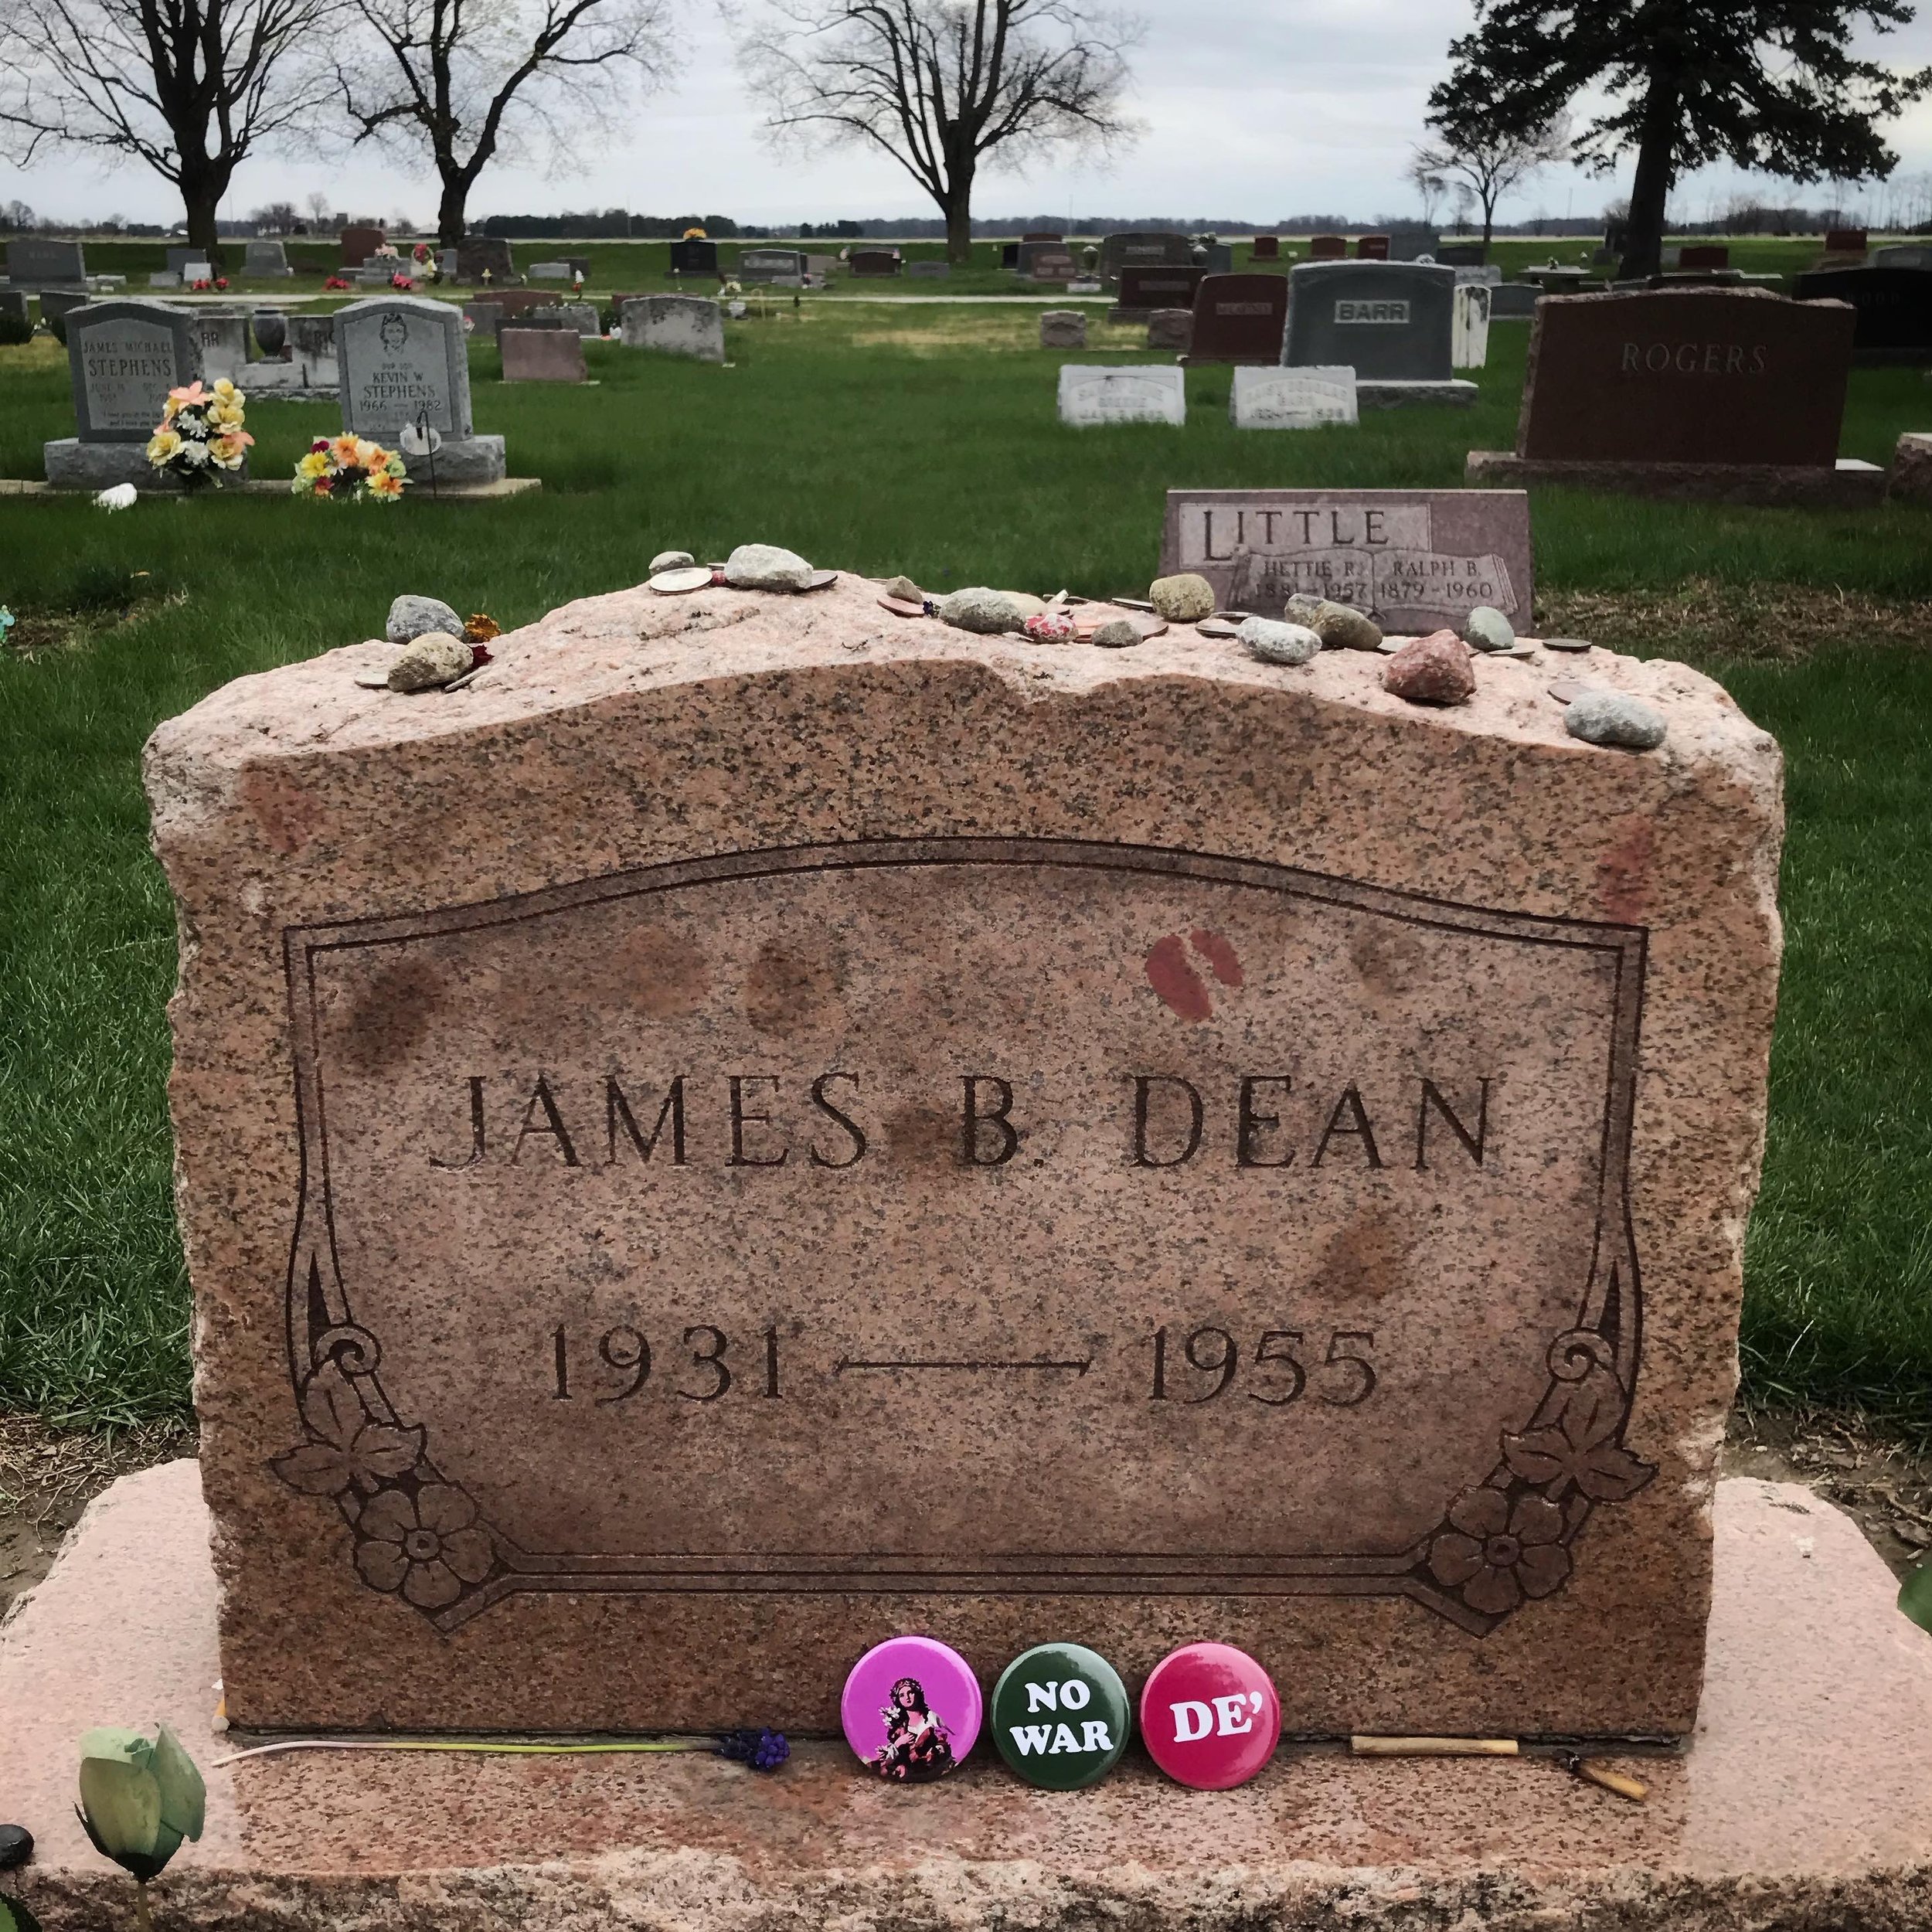 Volga Blues | The American Tour. On the way to Indiana University.
A quick stop to pay tribute to the one and only. With a Pop-aganda homage by Gaia Light.
.
James Dean grave. Fairmont, Indiana. April 2024.
.
#photojournalism #documentaryphotography 